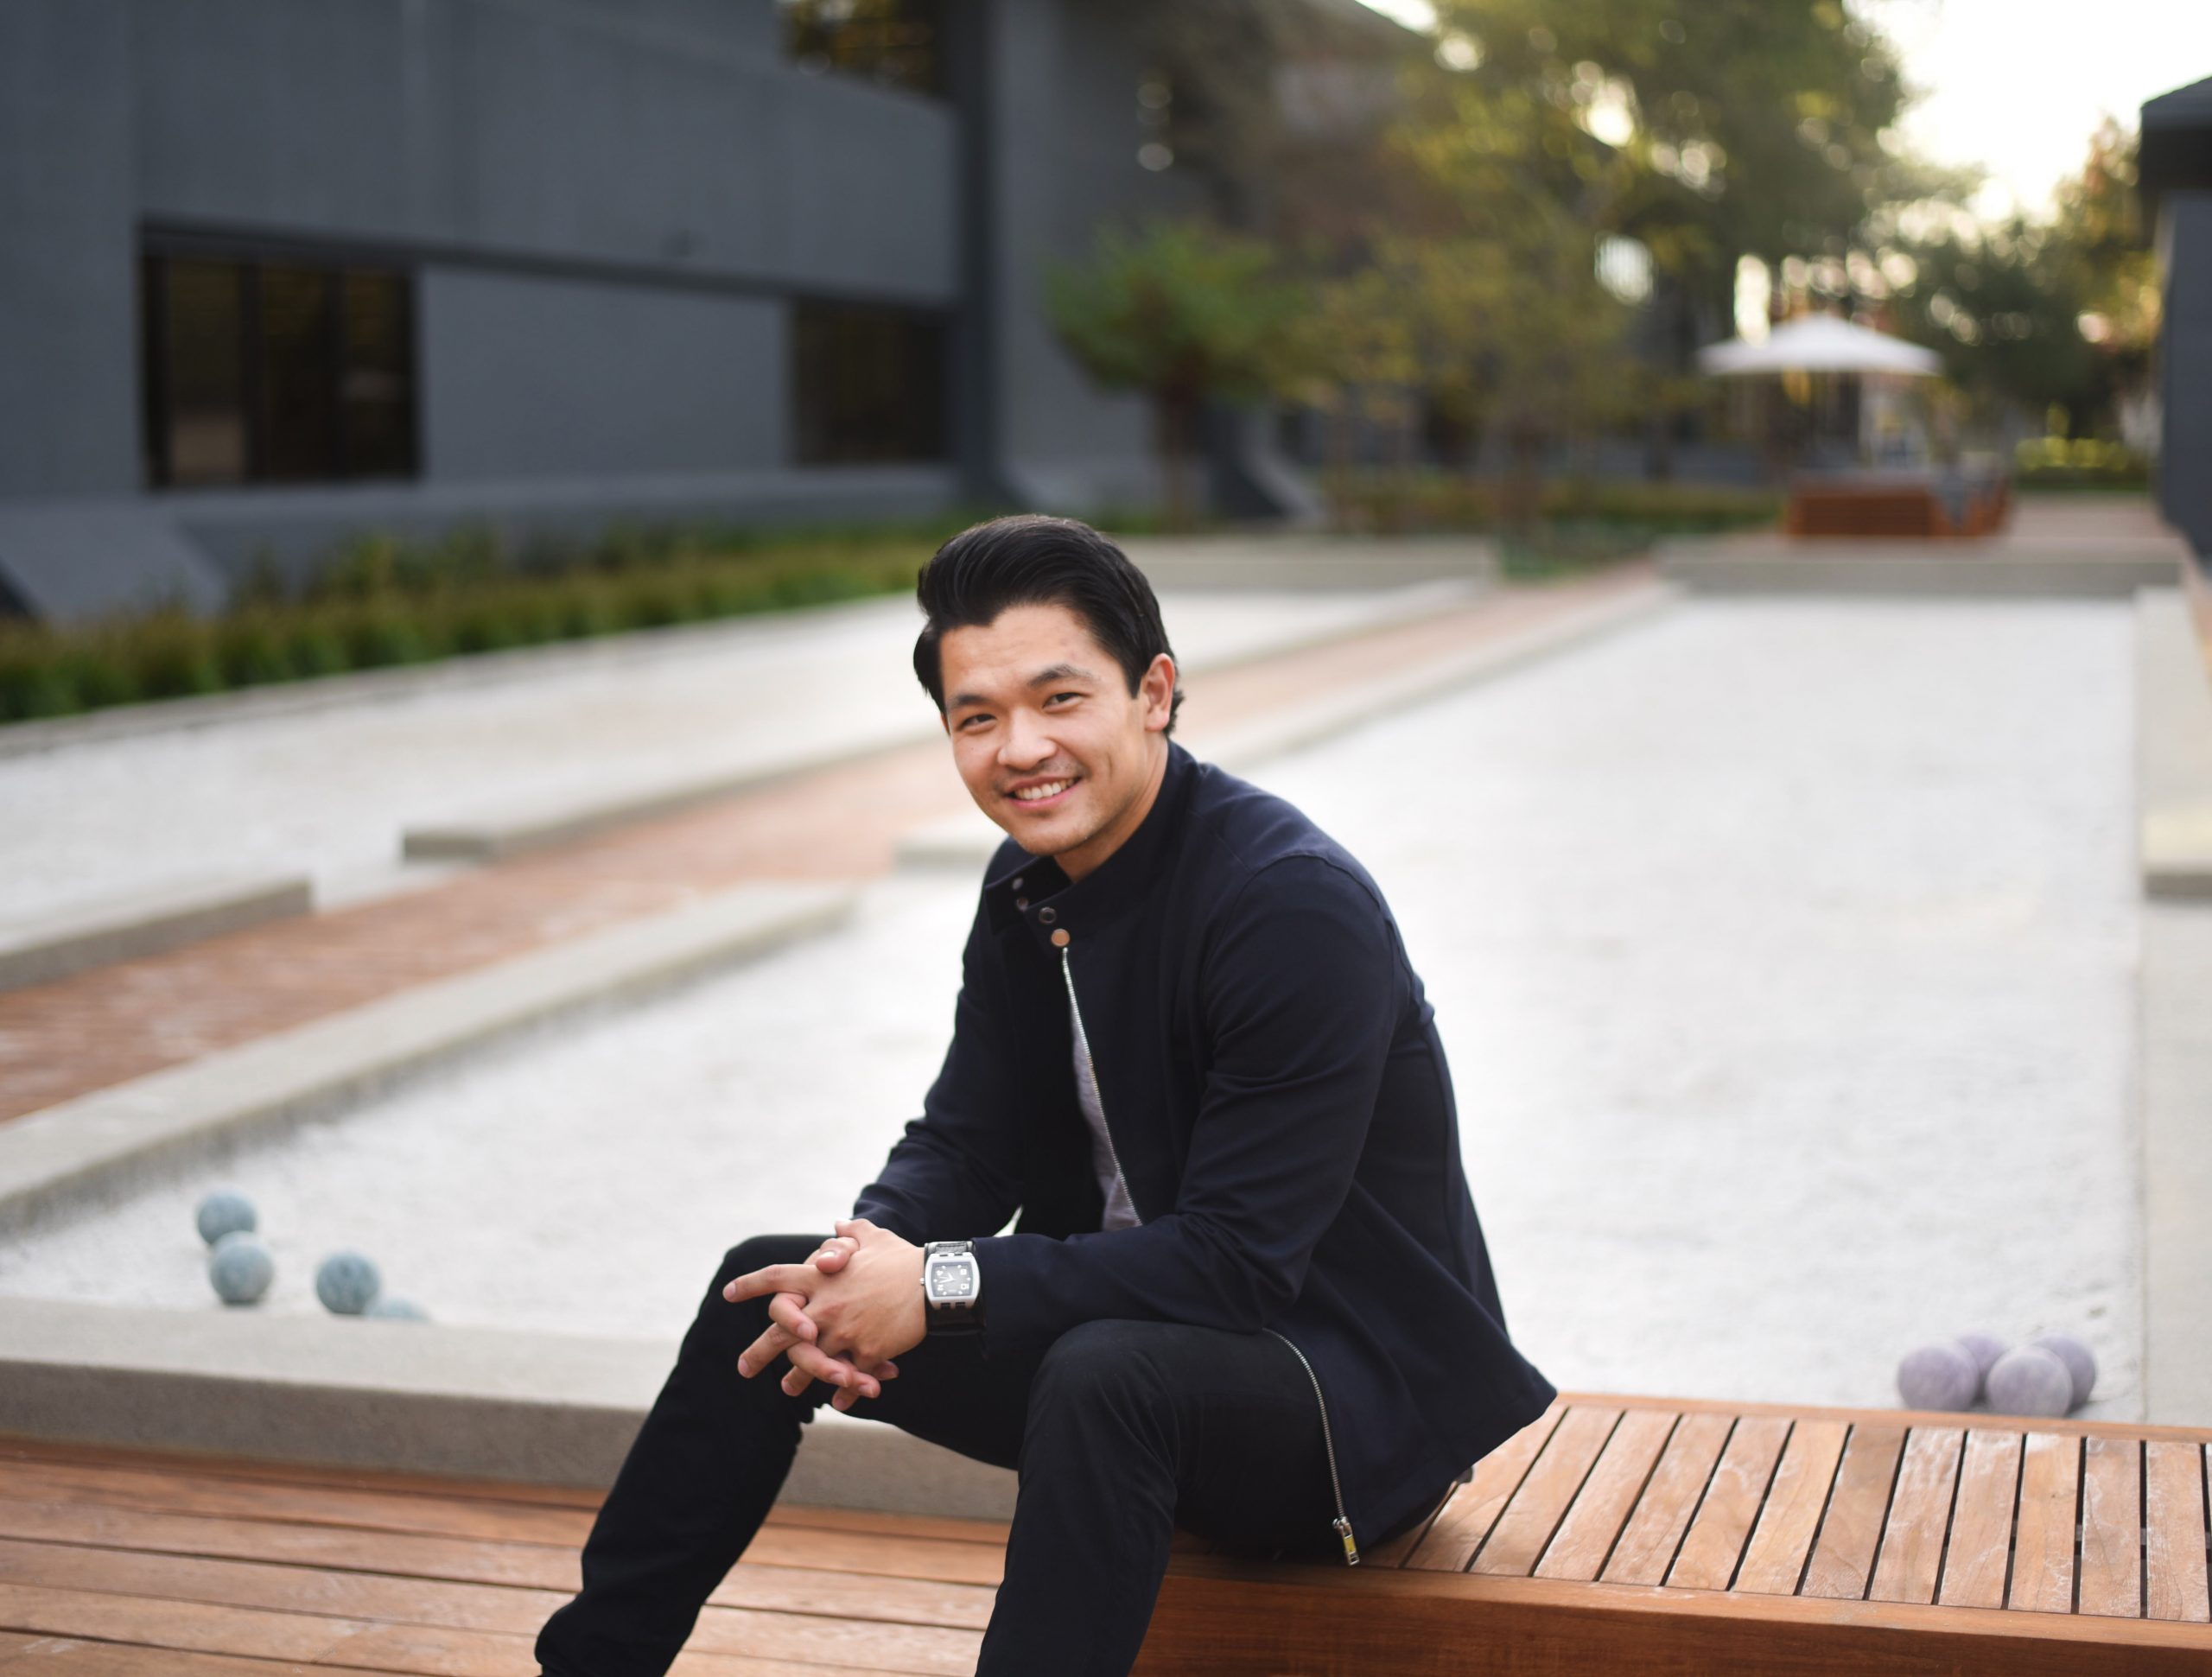 Han Jin sitting on bench smiling into the camera